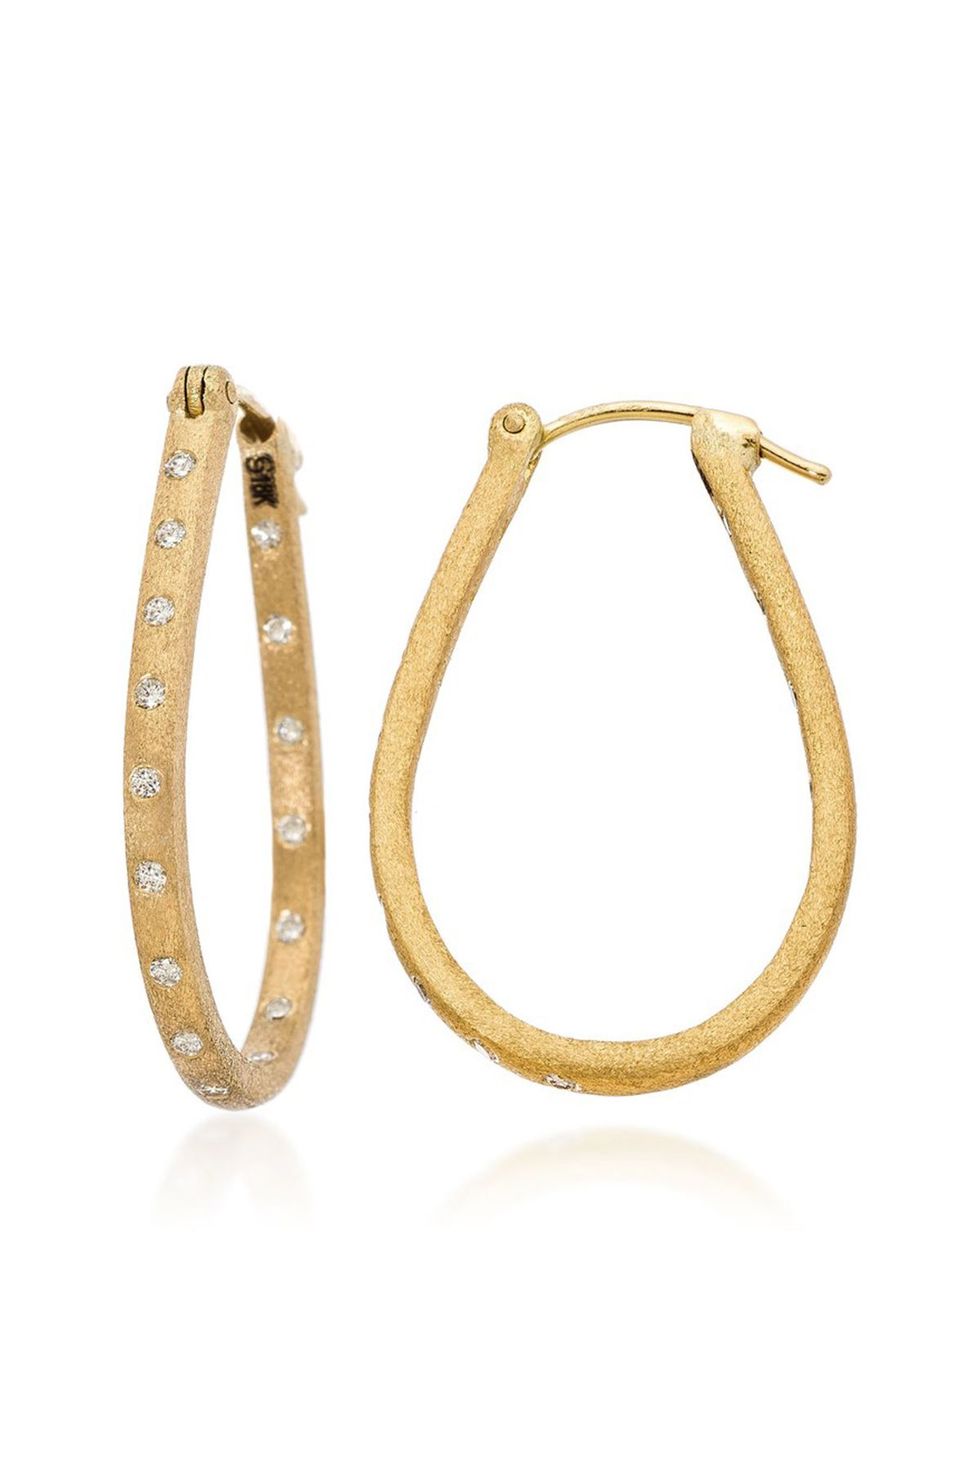 Dunes Diamond 18K Yellow Gold Hoop Earrings by Sethi Couture